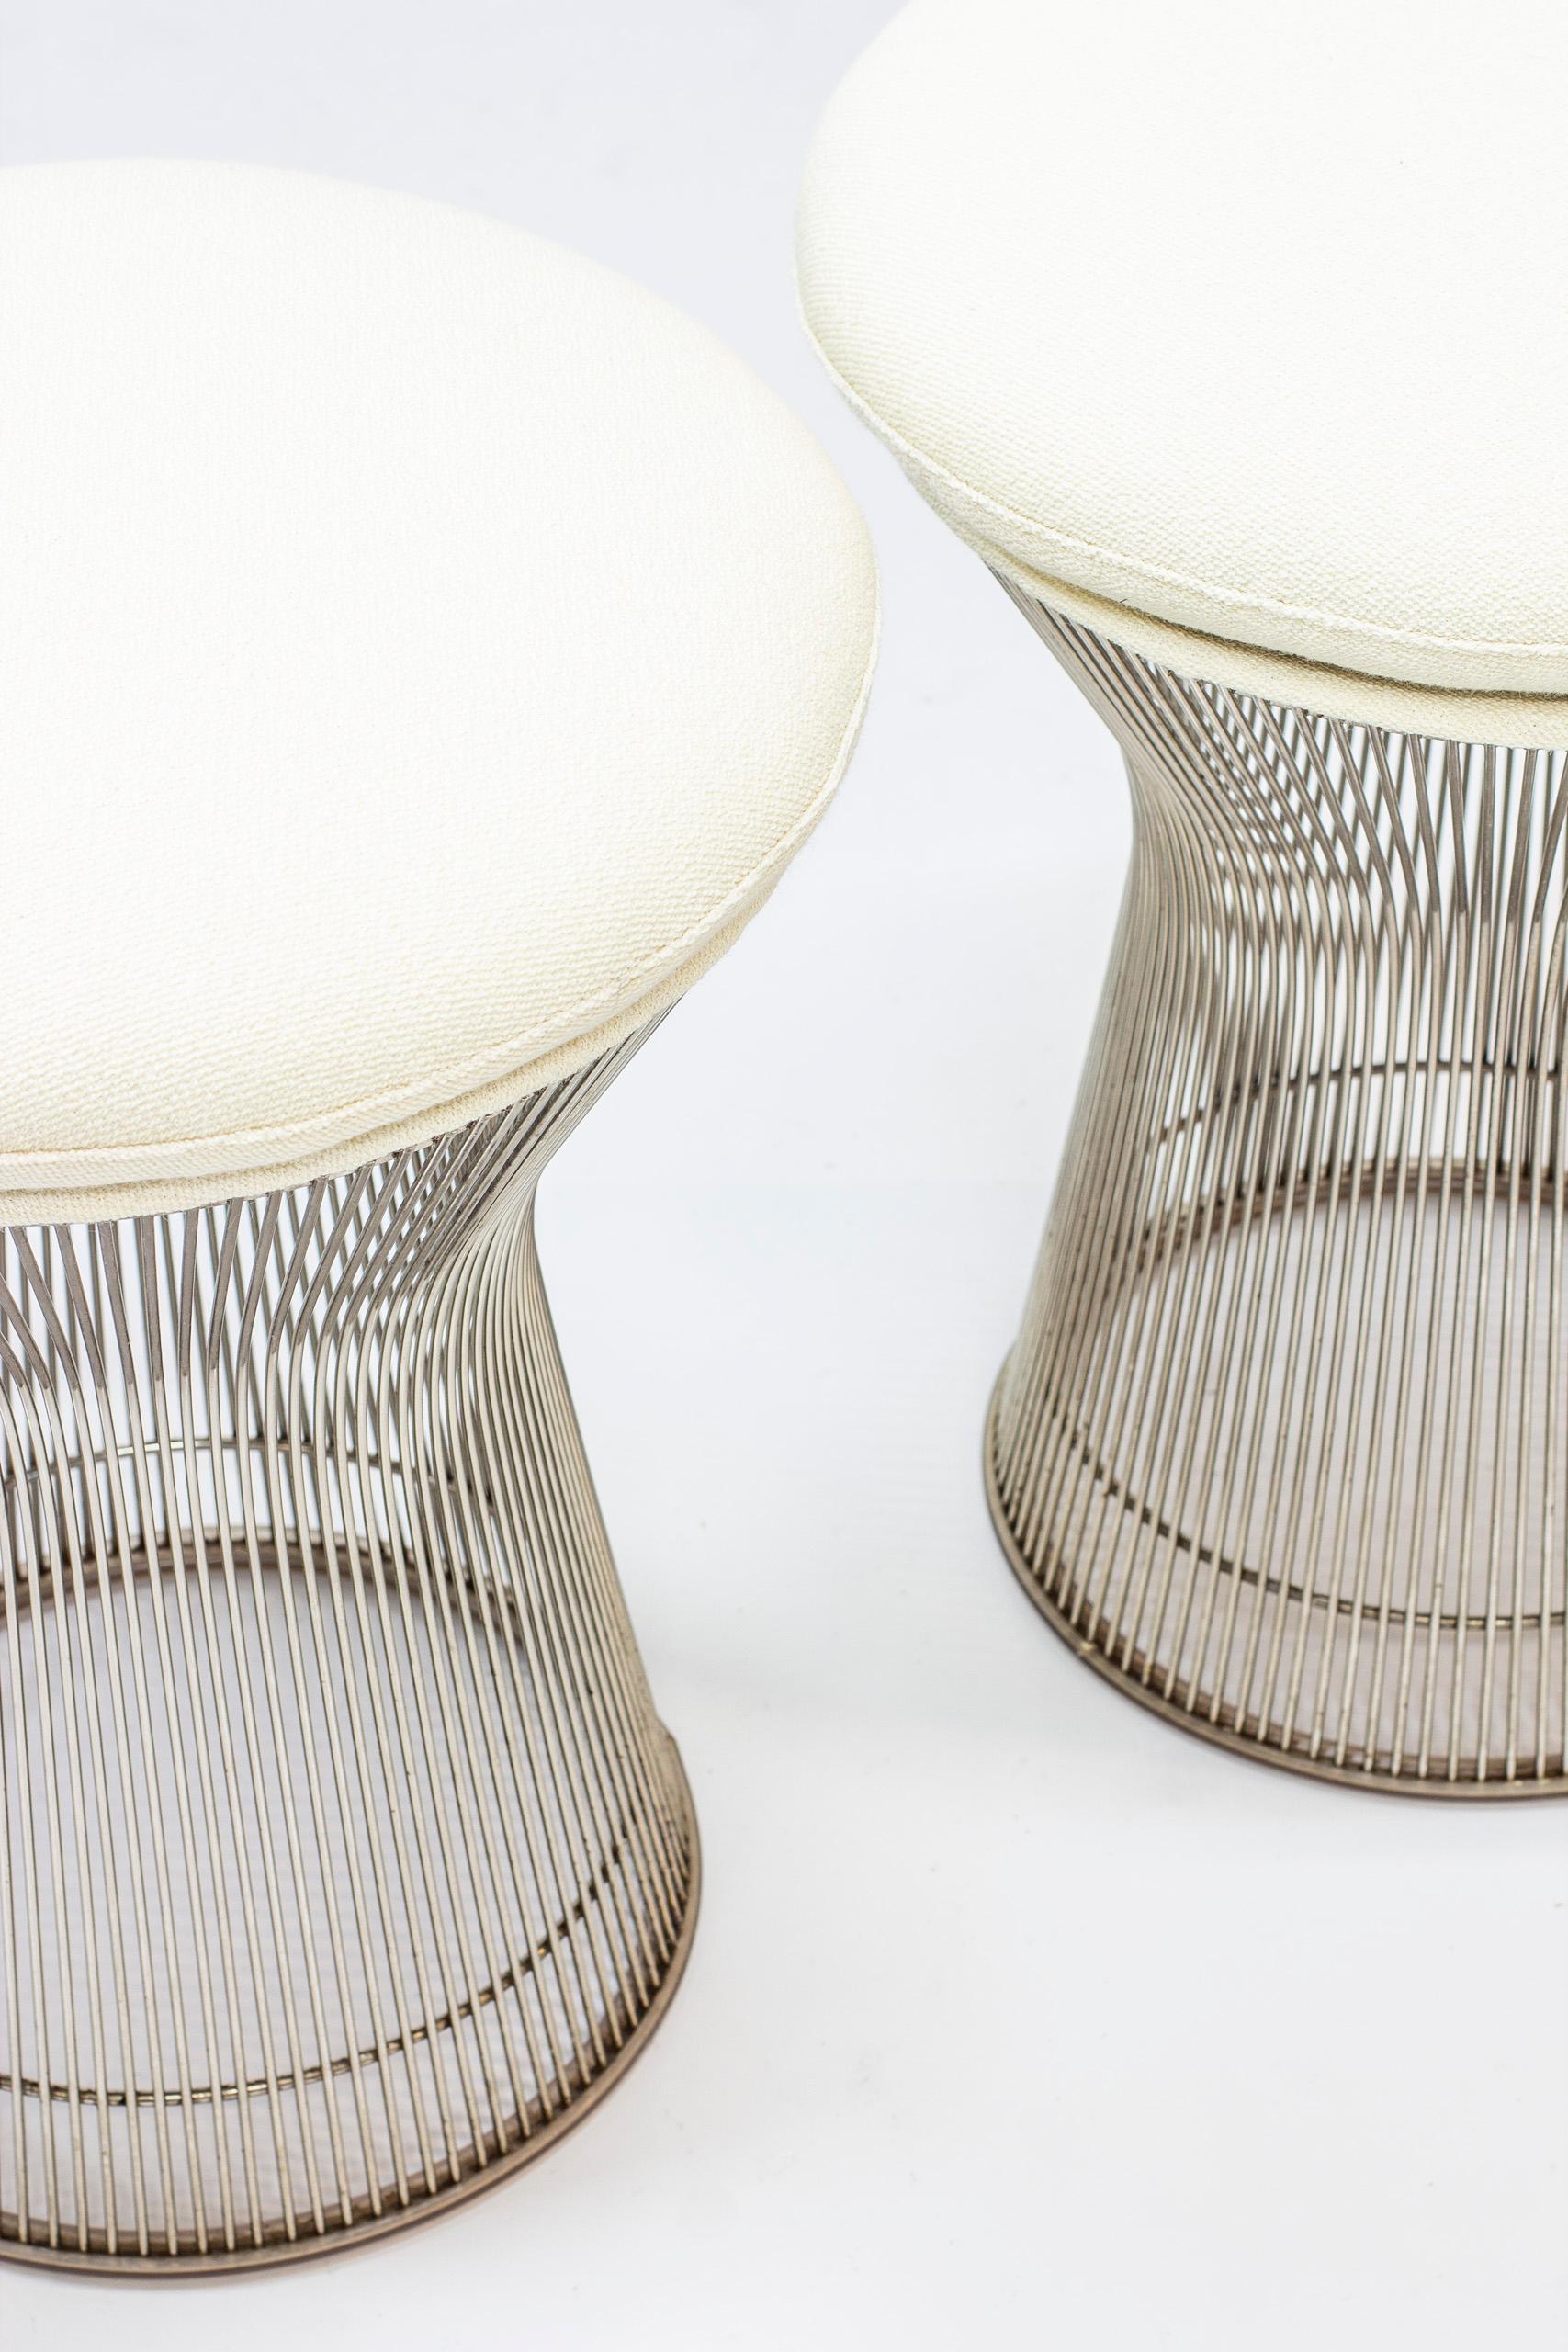 American Pair of Wire Stools by Warren Platner for Knoll